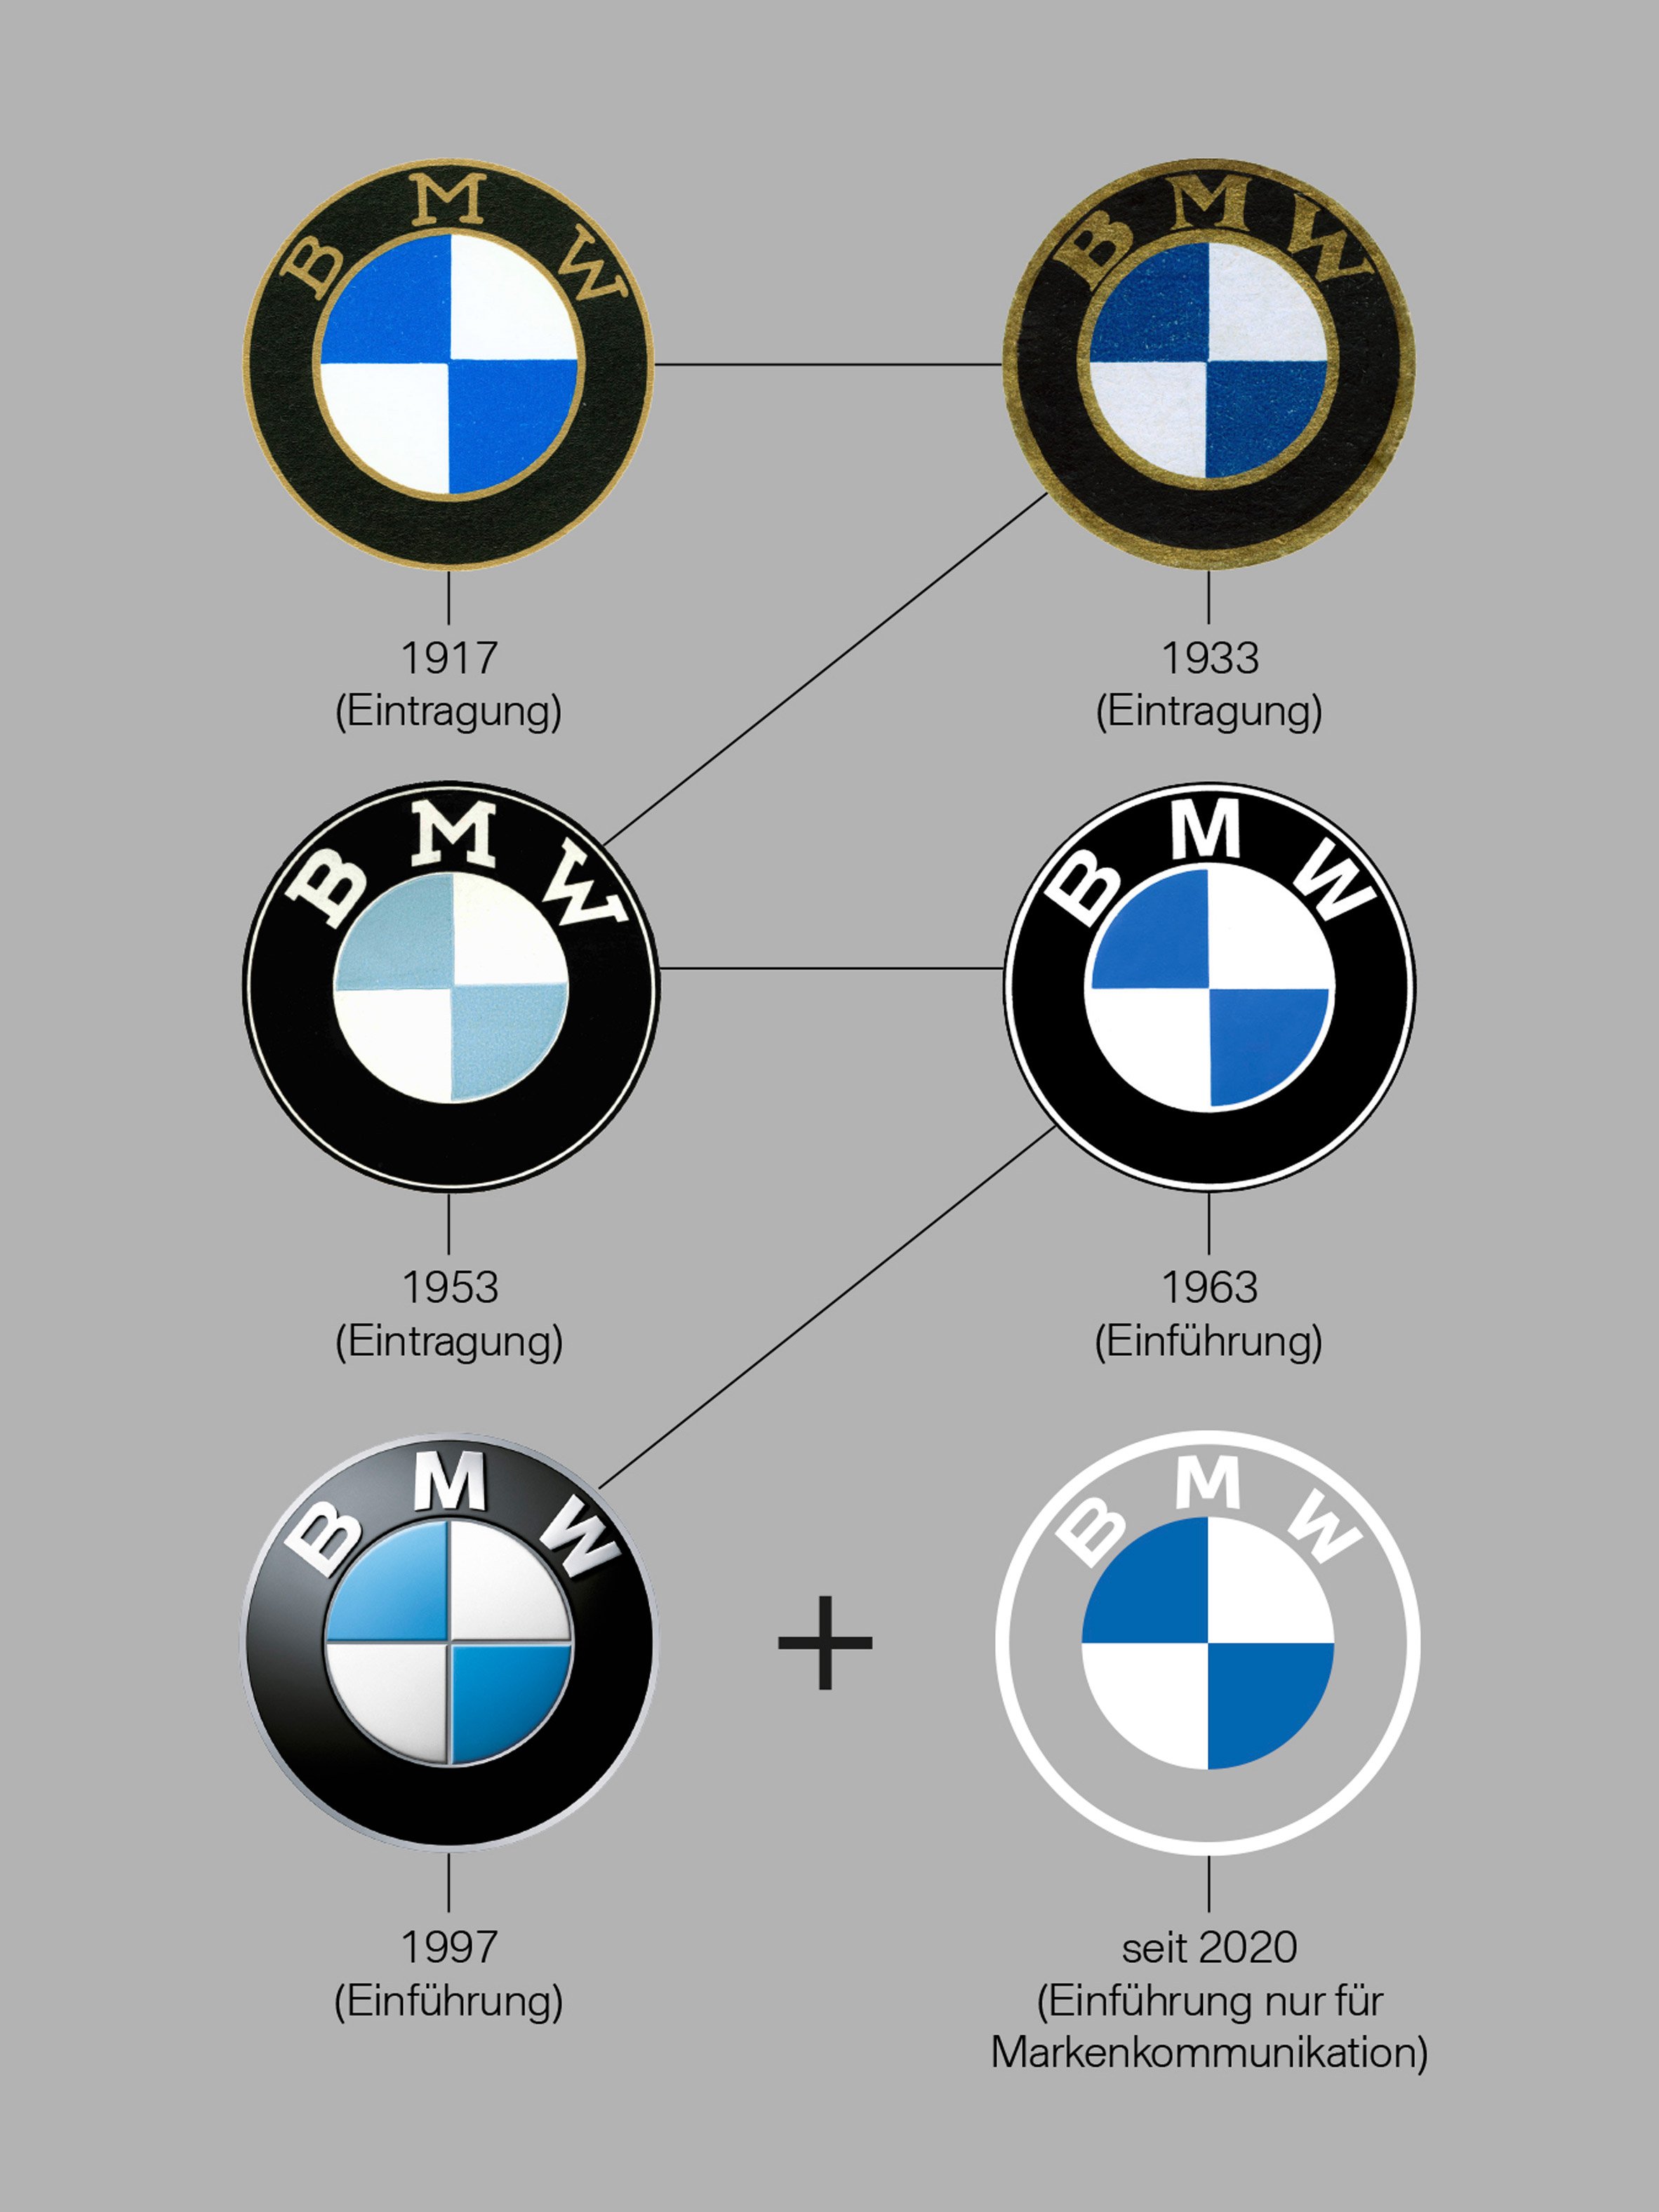 BMW unveils flat logo in first rebrand for two decades